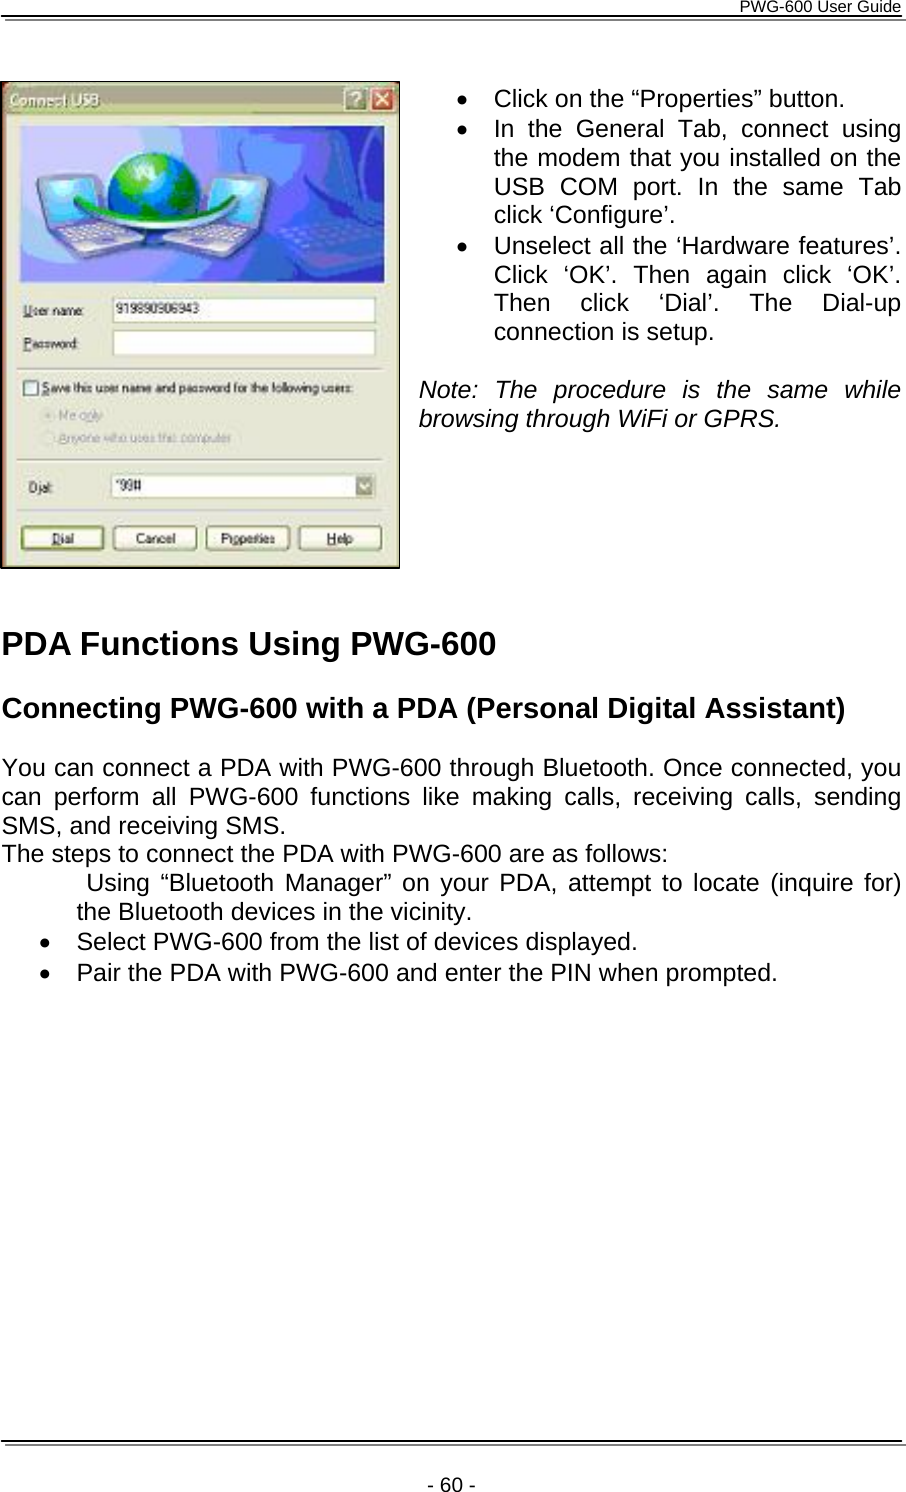      PWG-600 User Guide    - 60 -  •  Click on the “Properties” button. •  In the General Tab, connect using the modem that you installed on the USB COM port. In the same Tab click ‘Configure’.  •  Unselect all the ‘Hardware features’. Click ‘OK’. Then again click ‘OK’. Then click ‘Dial’. The Dial-up connection is setup.  Note: The procedure is the same while browsing through WiFi or GPRS.      PDA Functions Using PWG-600  Connecting PWG-600 with a PDA (Personal Digital Assistant)  You can connect a PDA with PWG-600 through Bluetooth. Once connected, you can perform all PWG-600 functions like making calls, receiving calls, sending SMS, and receiving SMS. The steps to connect the PDA with PWG-600 are as follows:        Using “Bluetooth Manager” on your PDA, attempt to locate (inquire for) the Bluetooth devices in the vicinity. •  Select PWG-600 from the list of devices displayed.  •  Pair the PDA with PWG-600 and enter the PIN when prompted. 